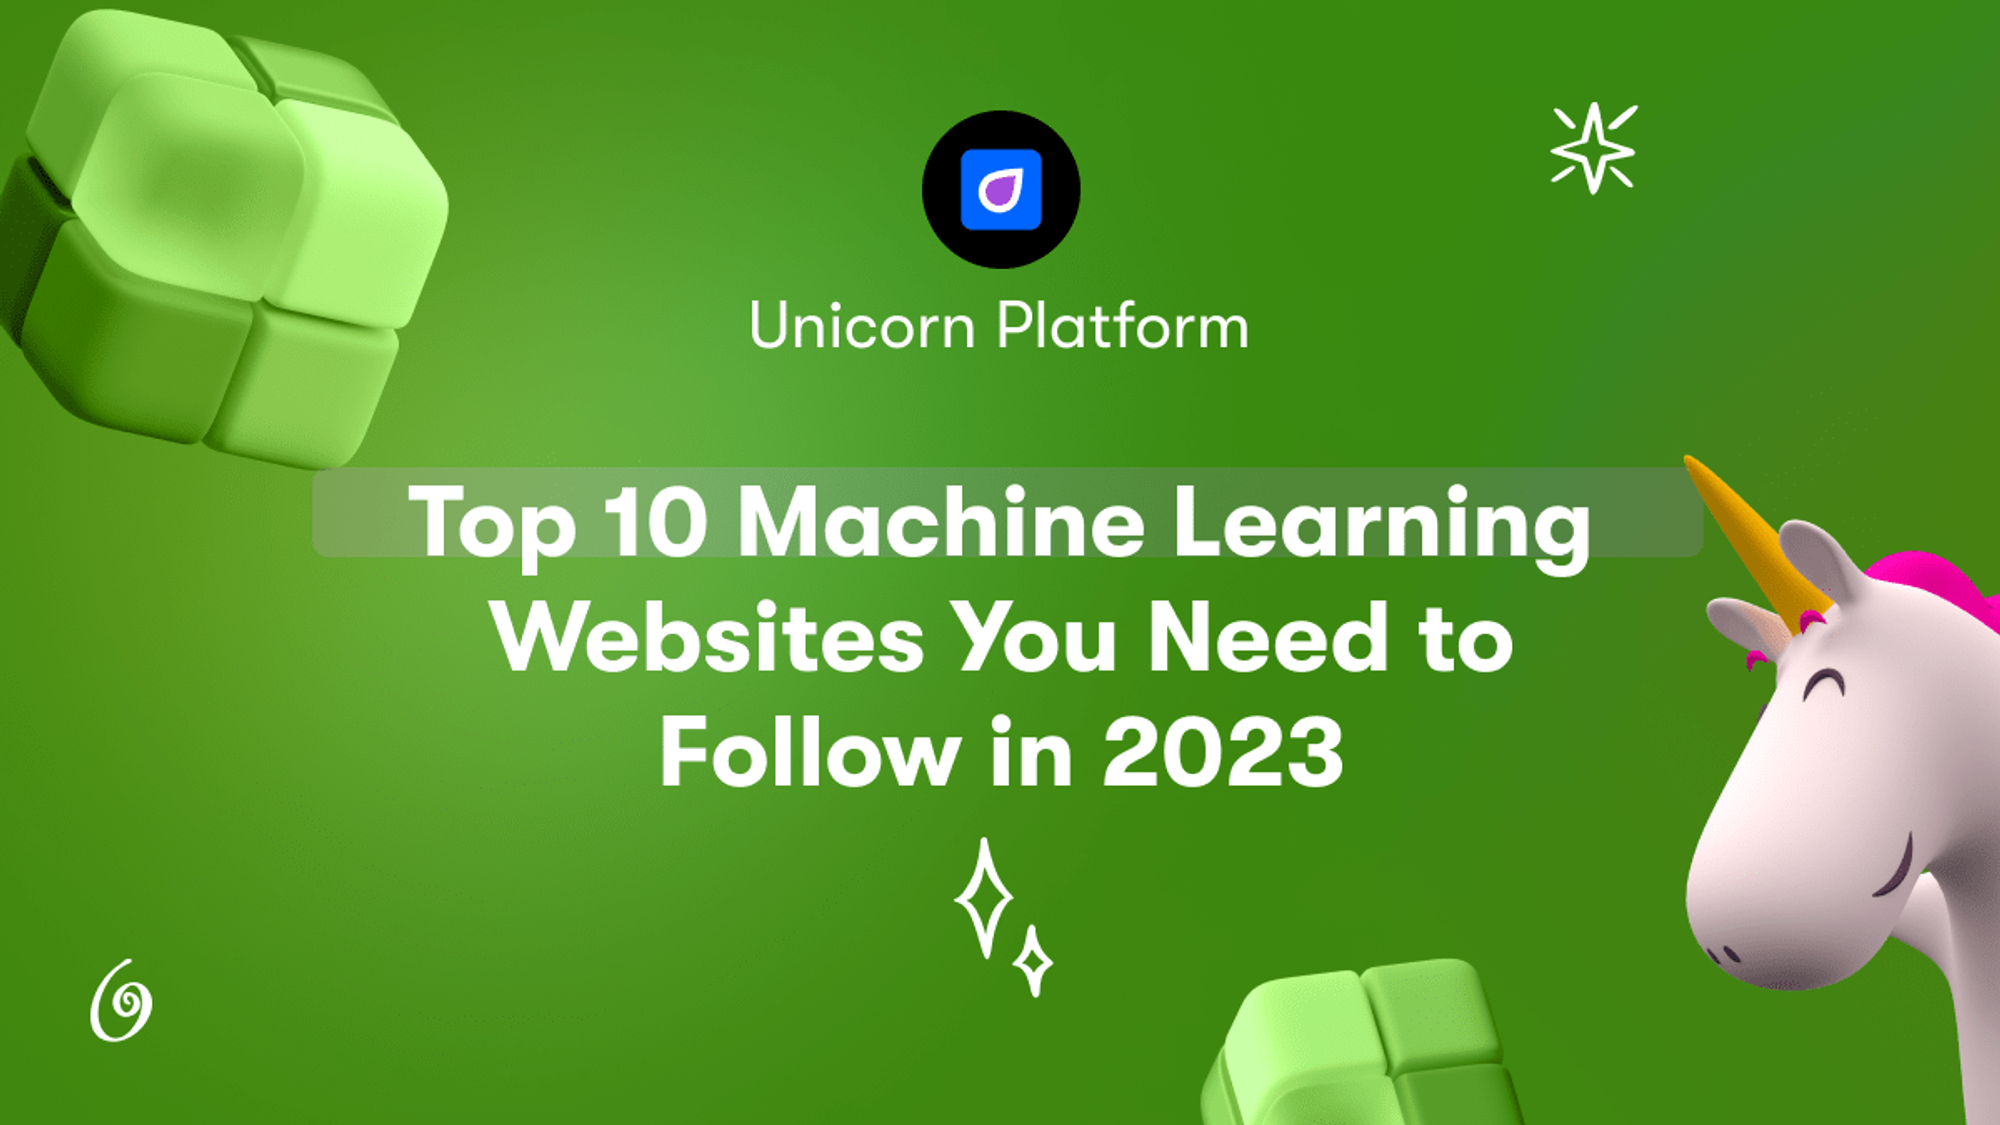 Top 10 Machine Learning Websites You Need to Follow in 2023